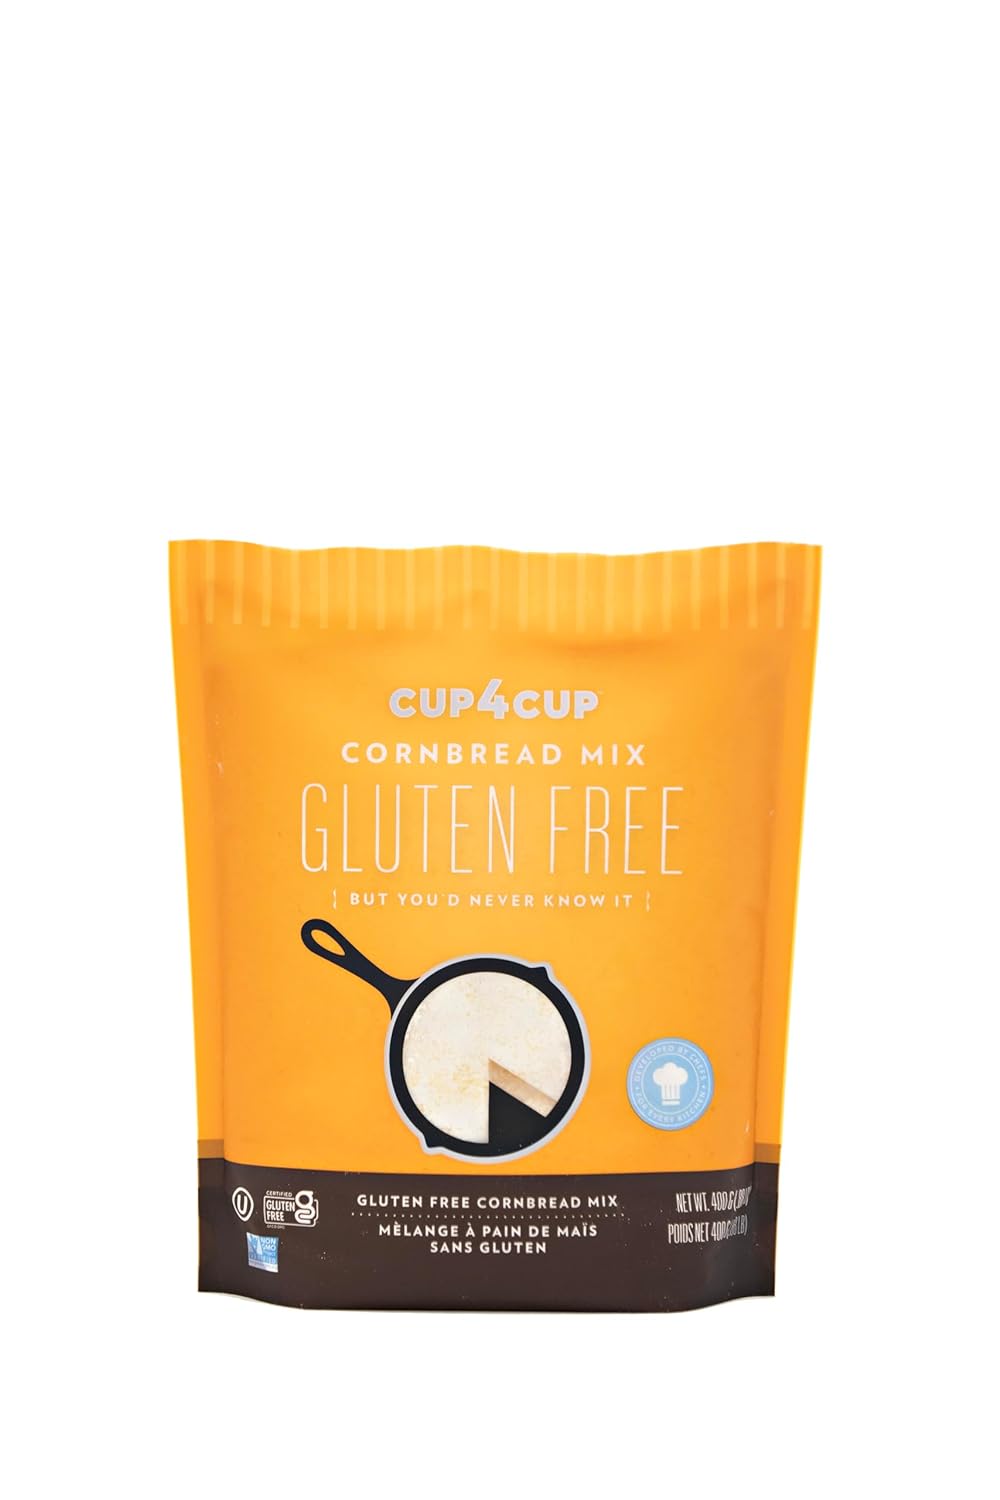 Cup4Cup Cornbread Mix, 0.88 Pounds, Certified Gluten Free, Dairy Free, Non-GMO, Kosher, Made in the USA